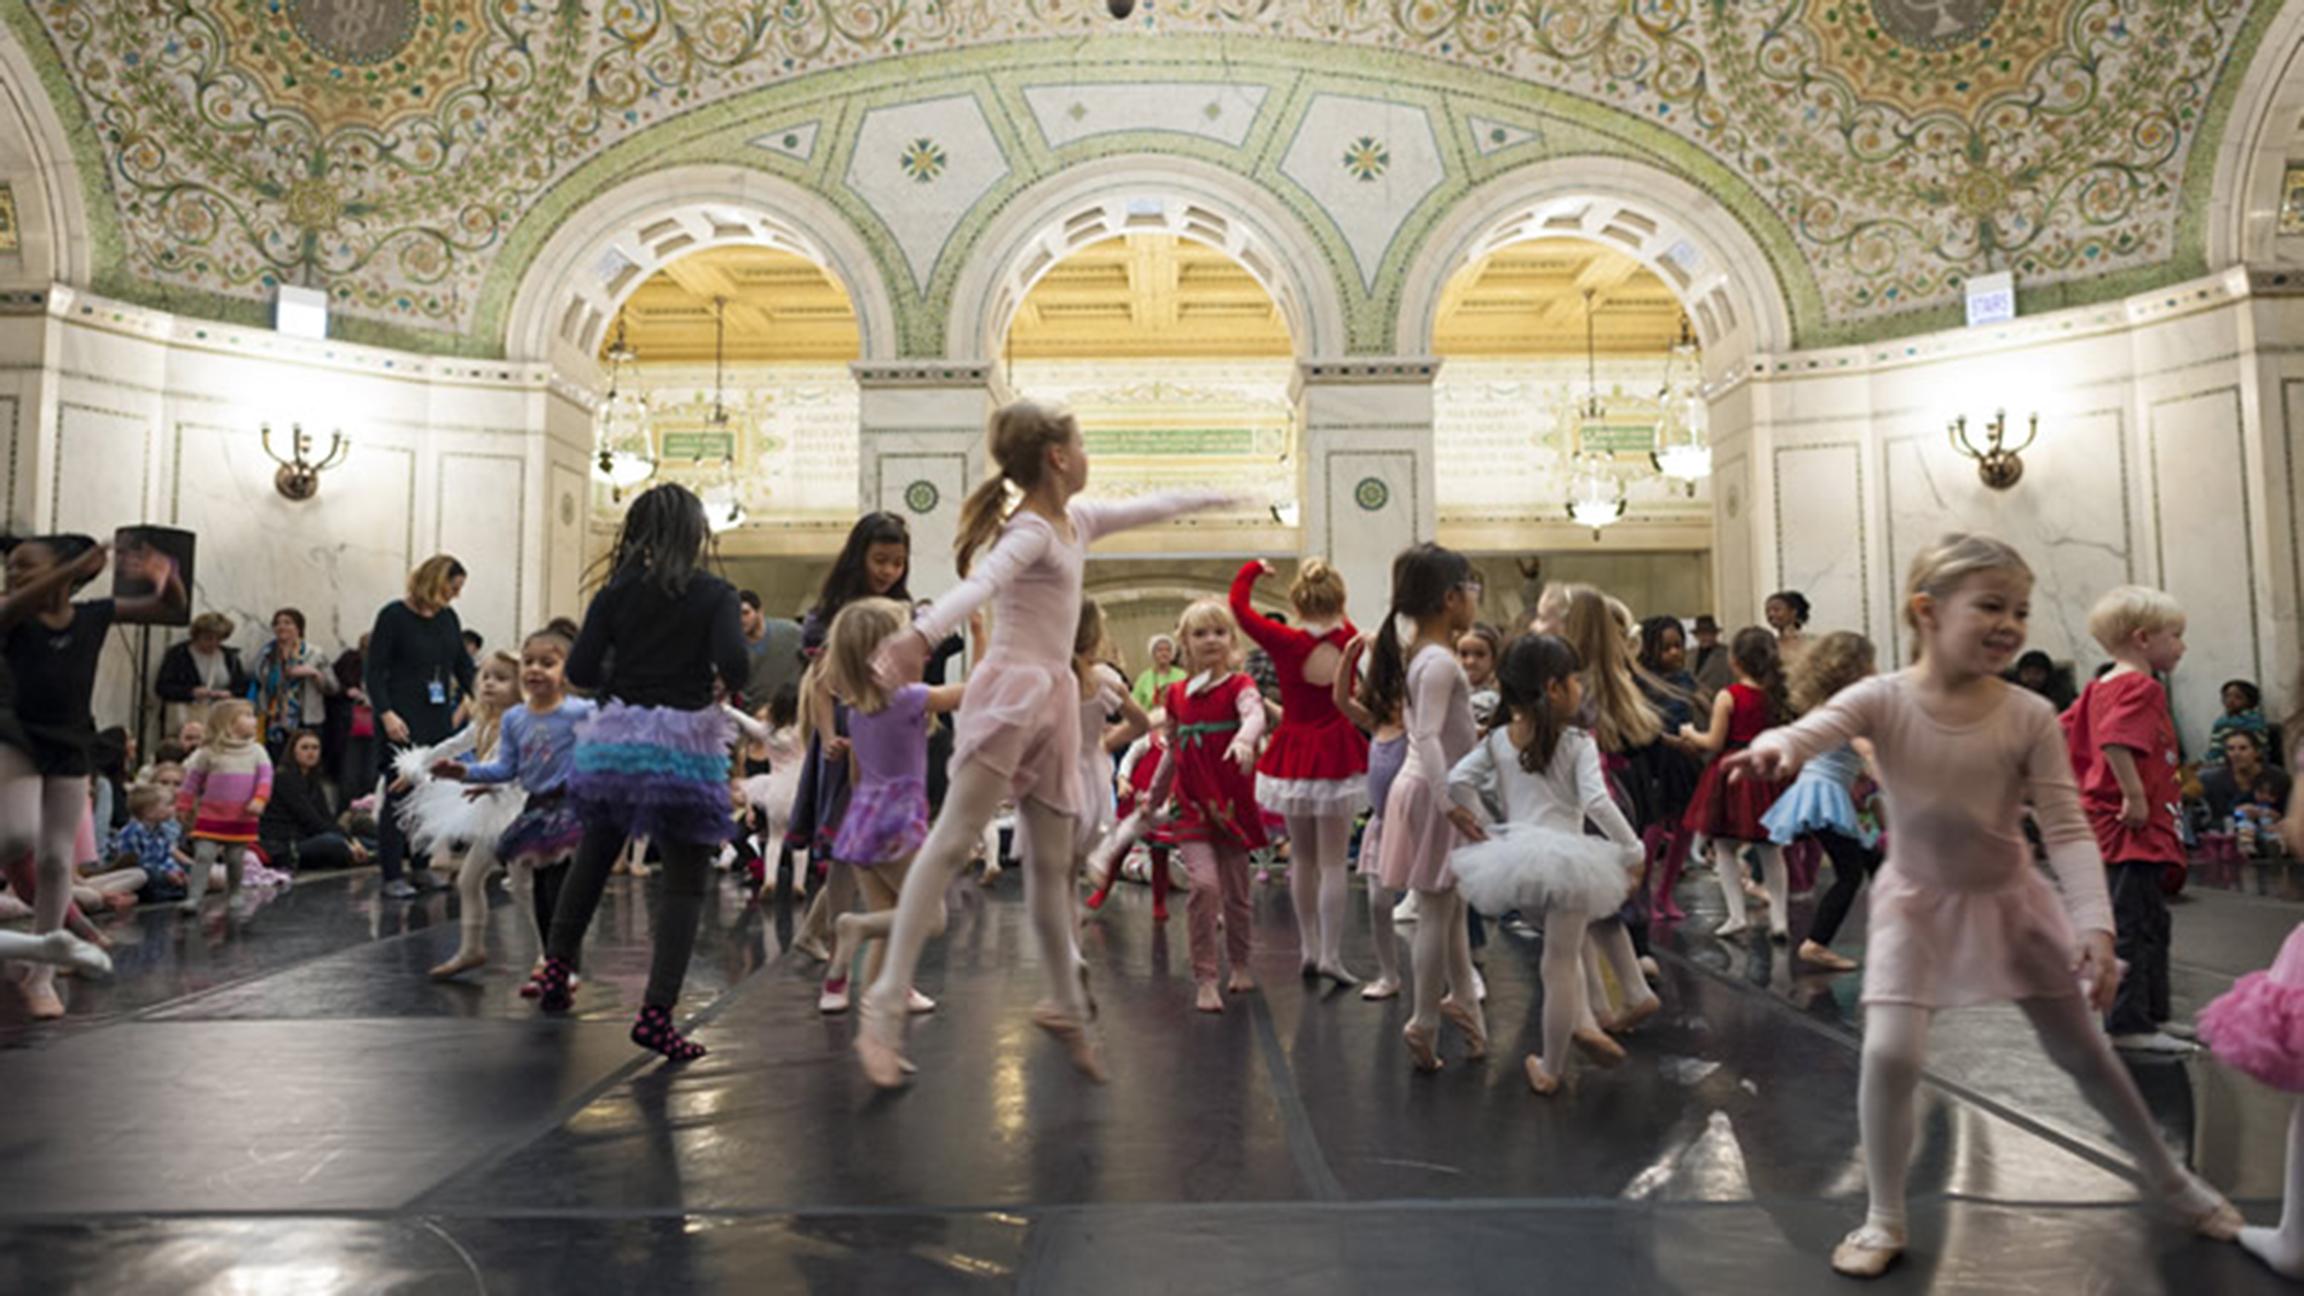 Sugar plum fairies of all ages can dress up and boogie down this weekend. (Courtesy of City of Chicago)